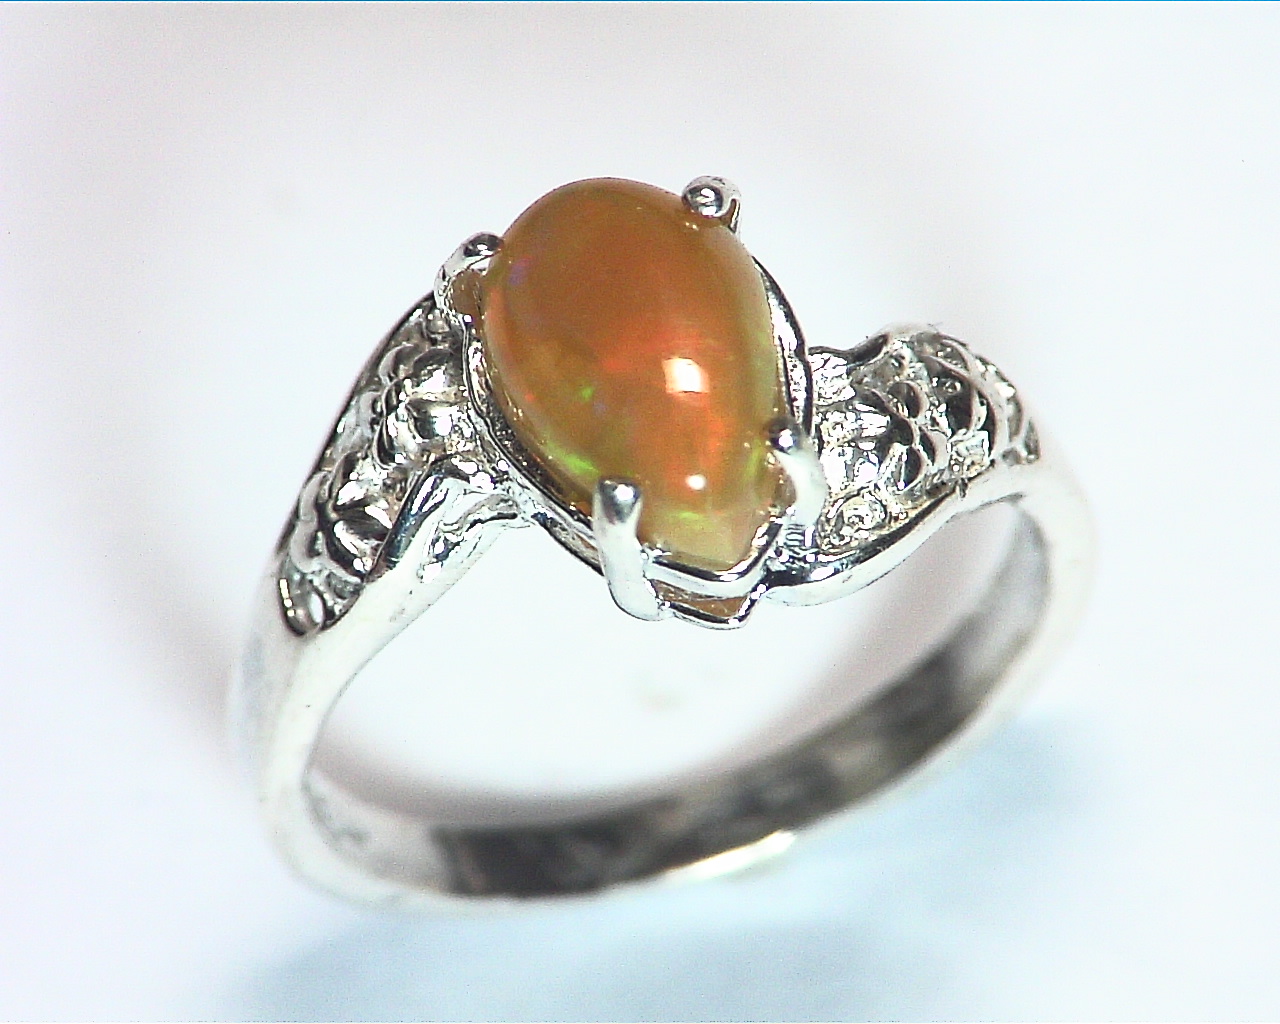 Opal (Mexican) Genuine Gemstone in Sterling silver Ring RSS,600 8